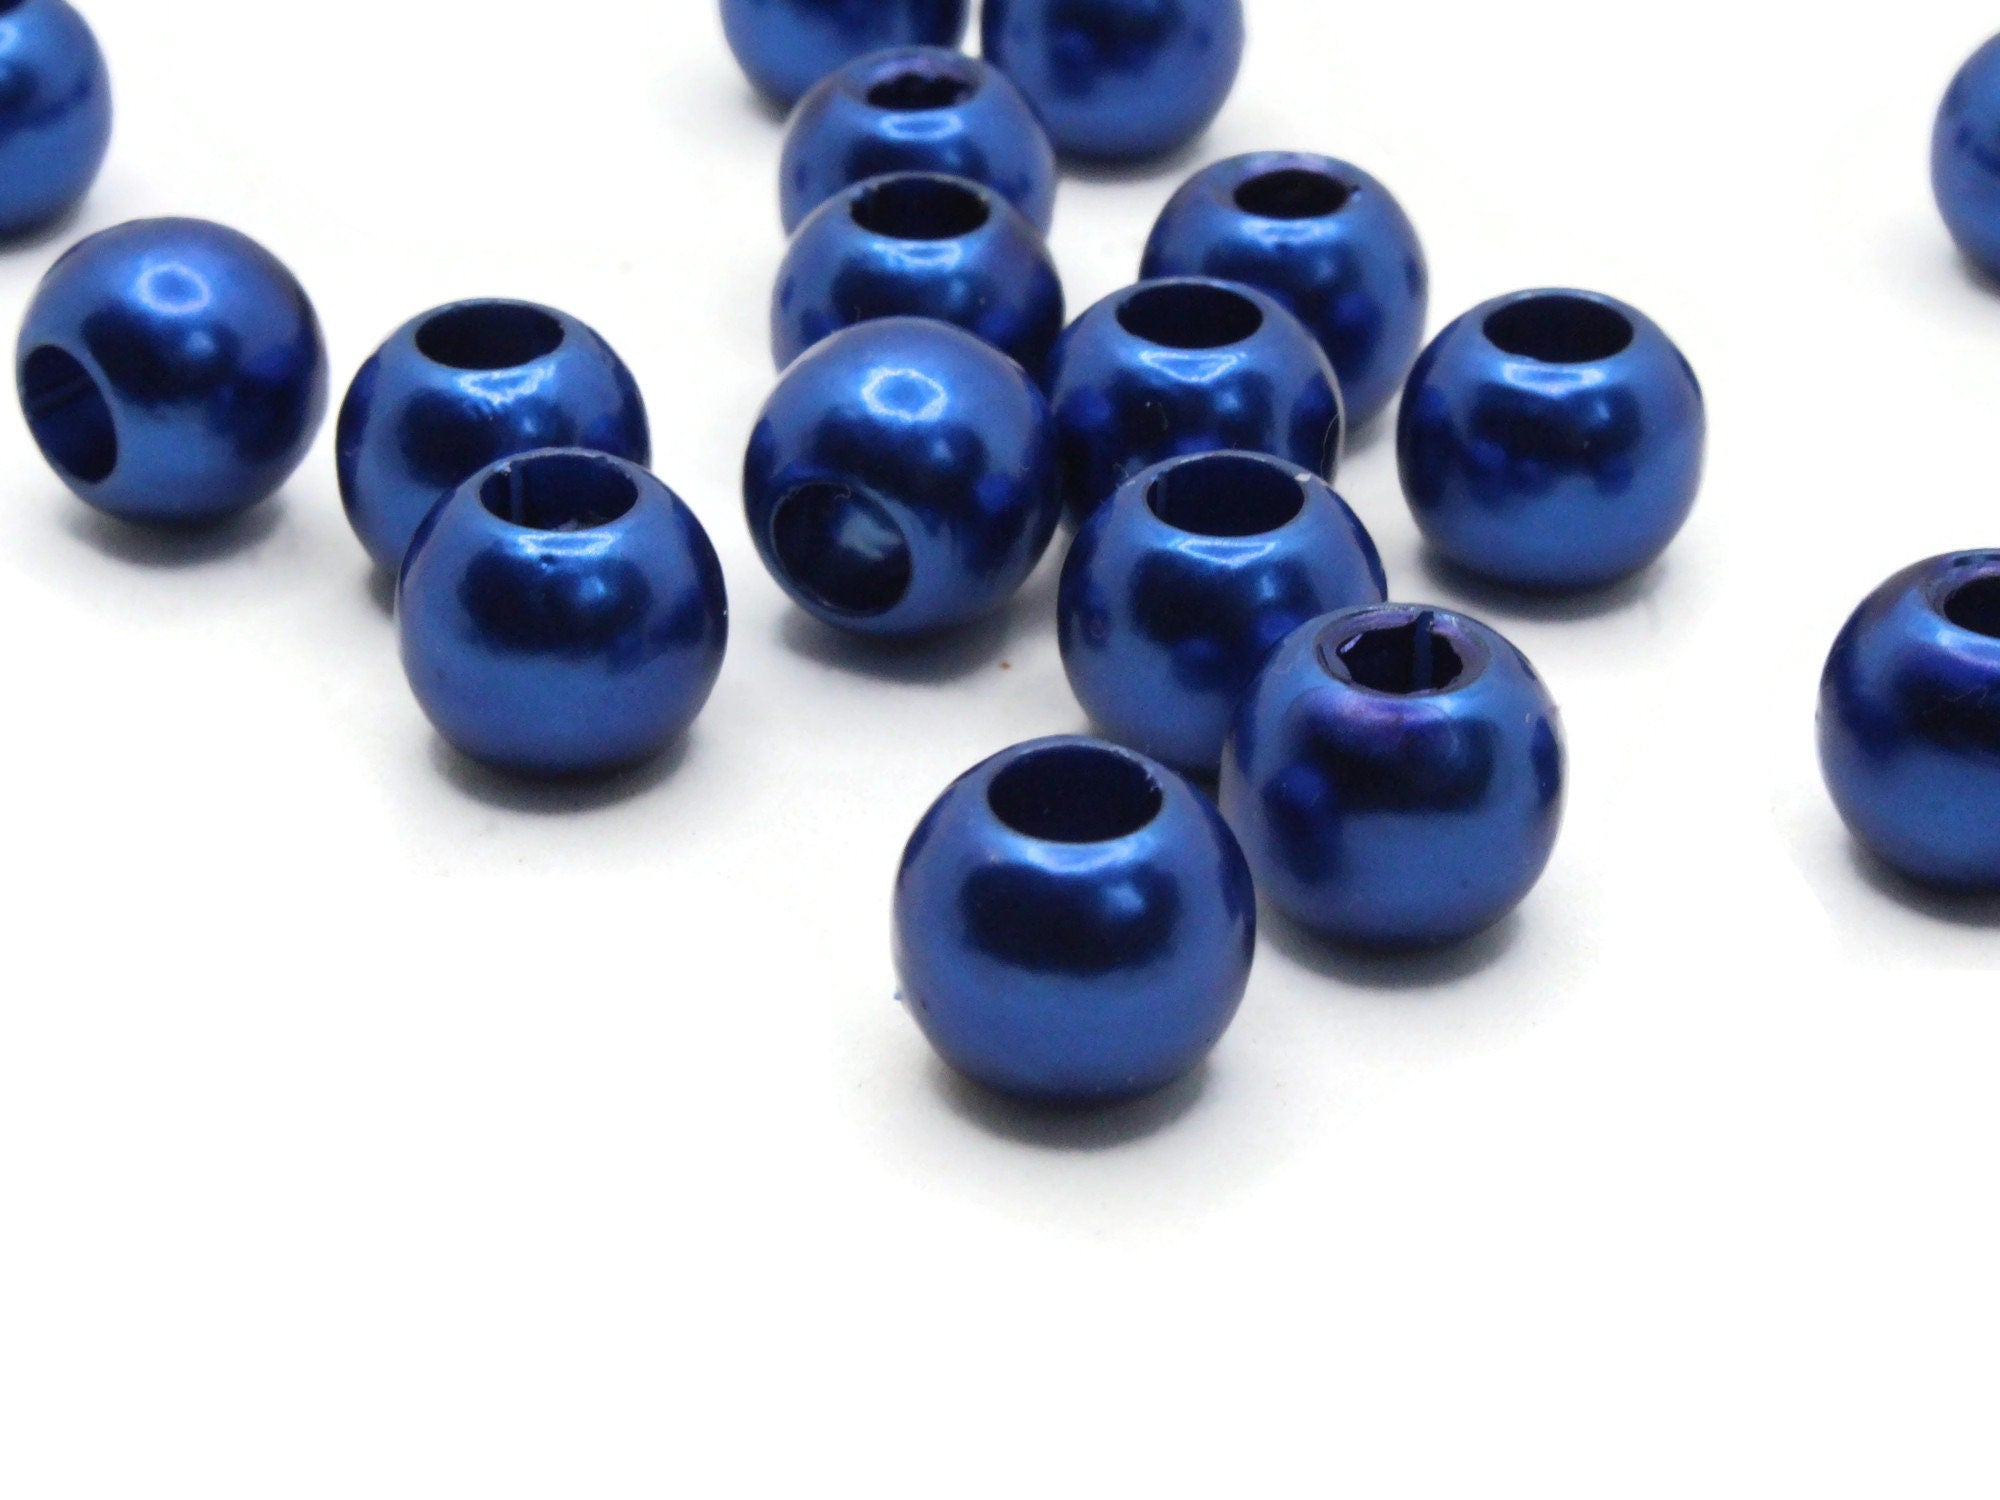 12mm Royal Blue Marble Beads, Marble Beads, 12mm Acrylic Marble Beads, 12mm  Mini Chunky Beads, 12mm Beads, 12mm Marble Beads